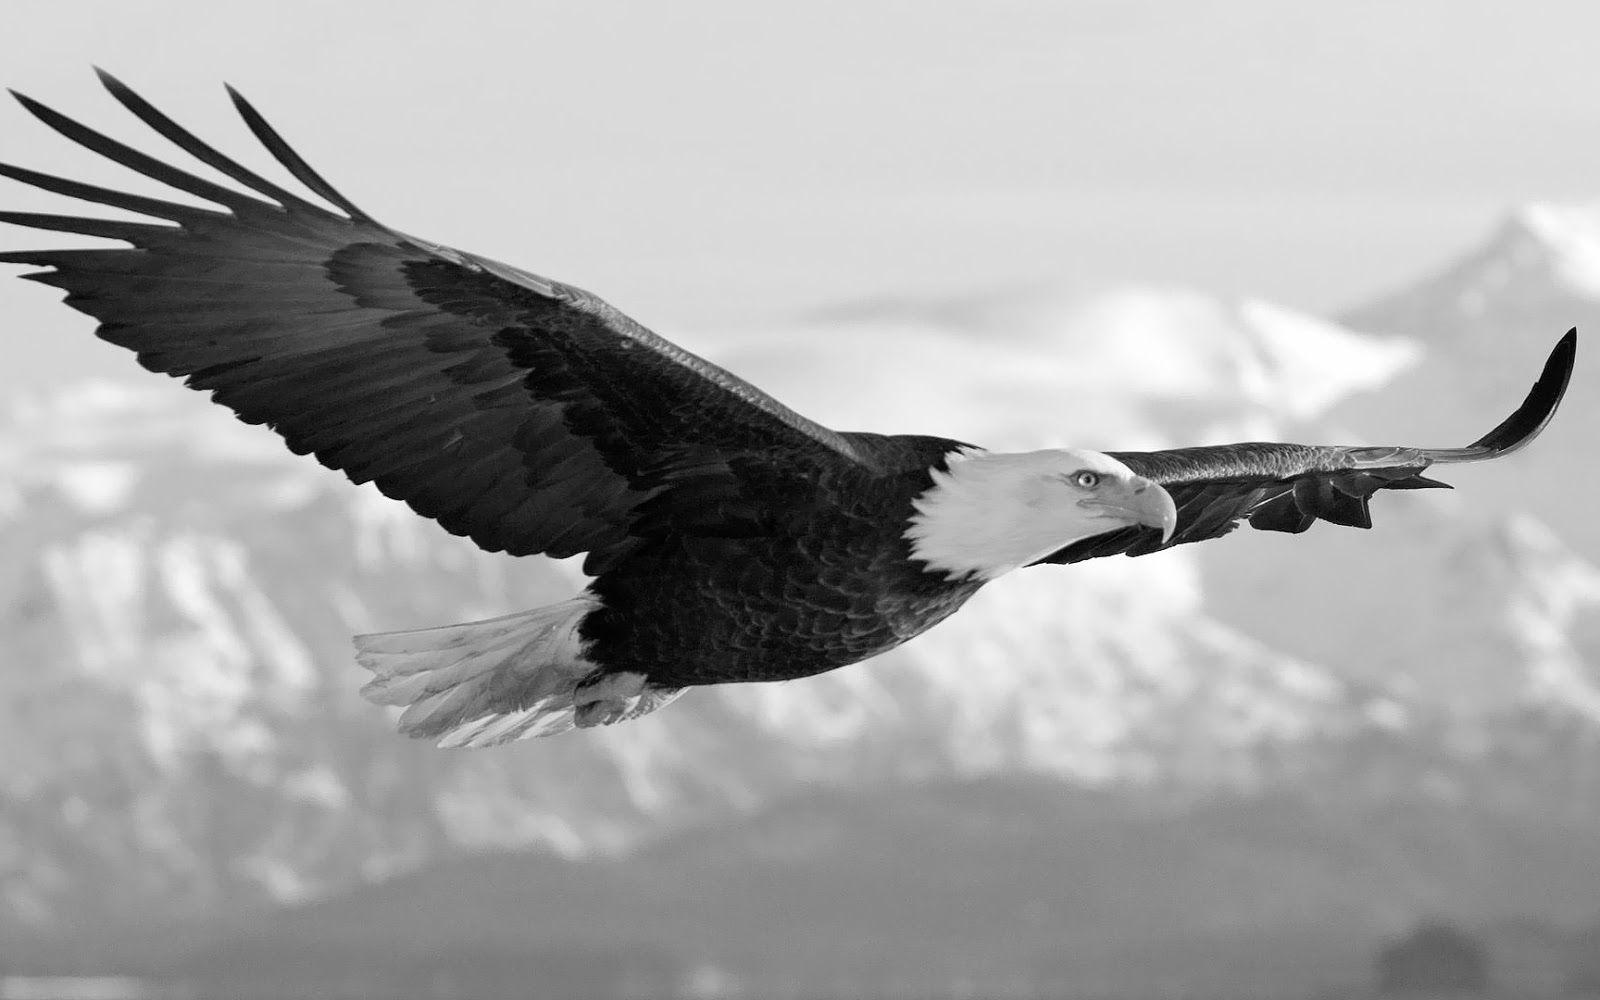 Black And White Eagle Photo With A Flying High In The Air